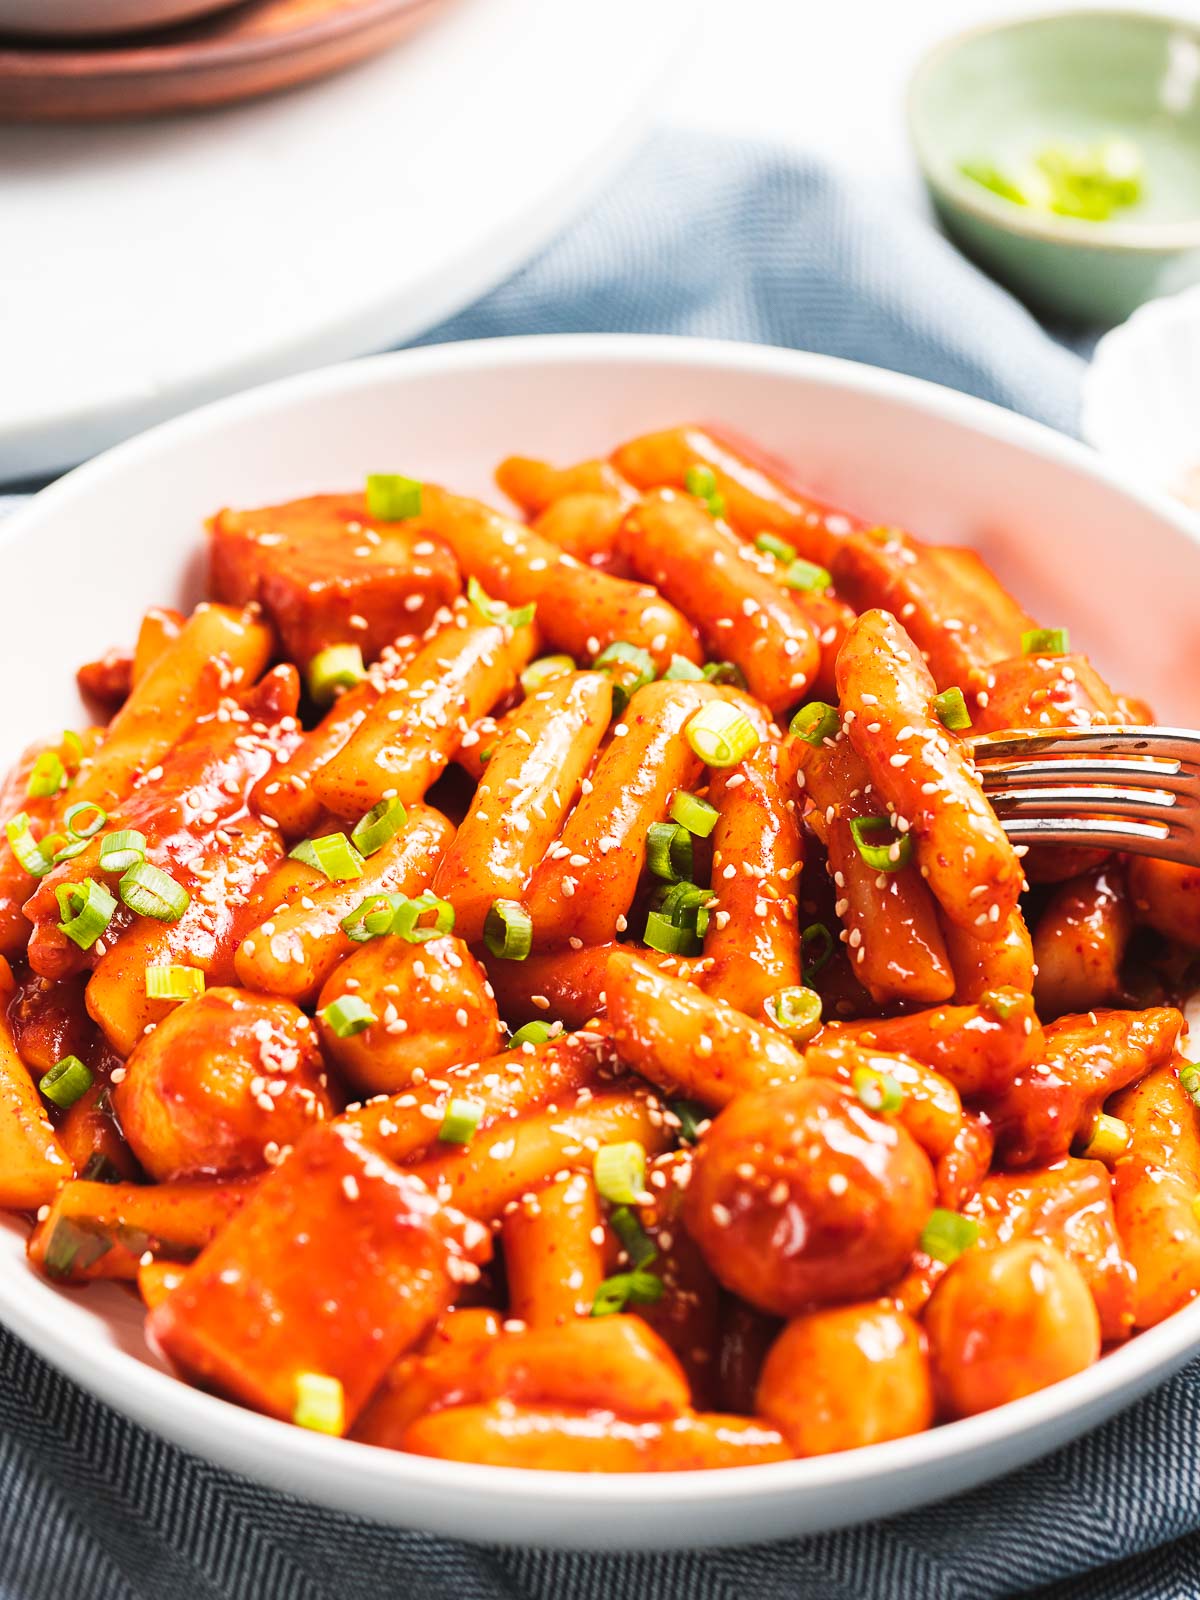 Tteokbokki made with gochujang and fish cakes garnished with scallions and sesame seeds.